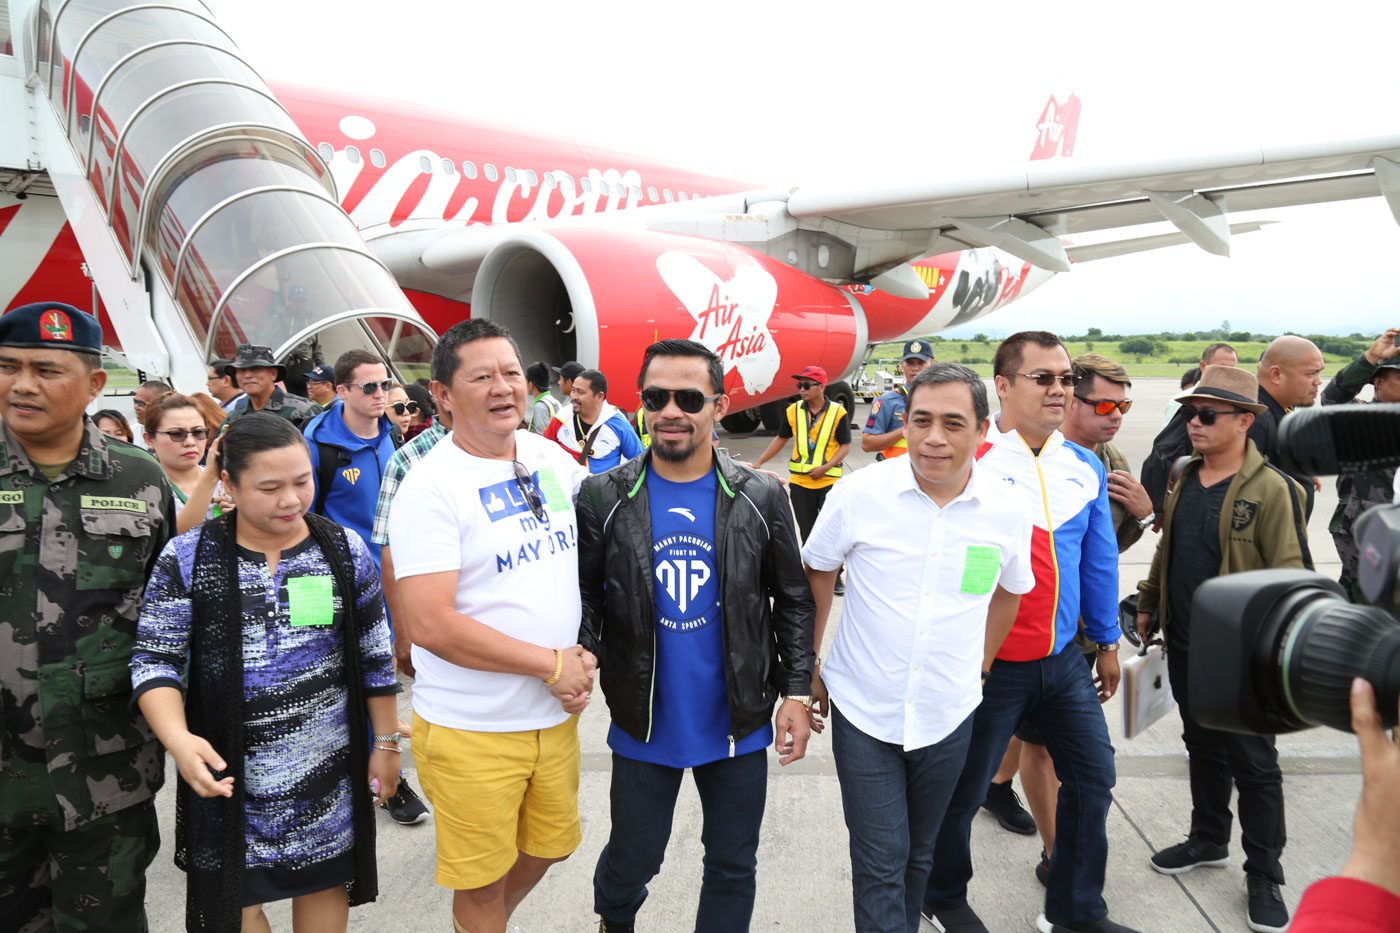 IN PHOTOS: Manny Pacquiao arrives back in GenSan after Horn fight